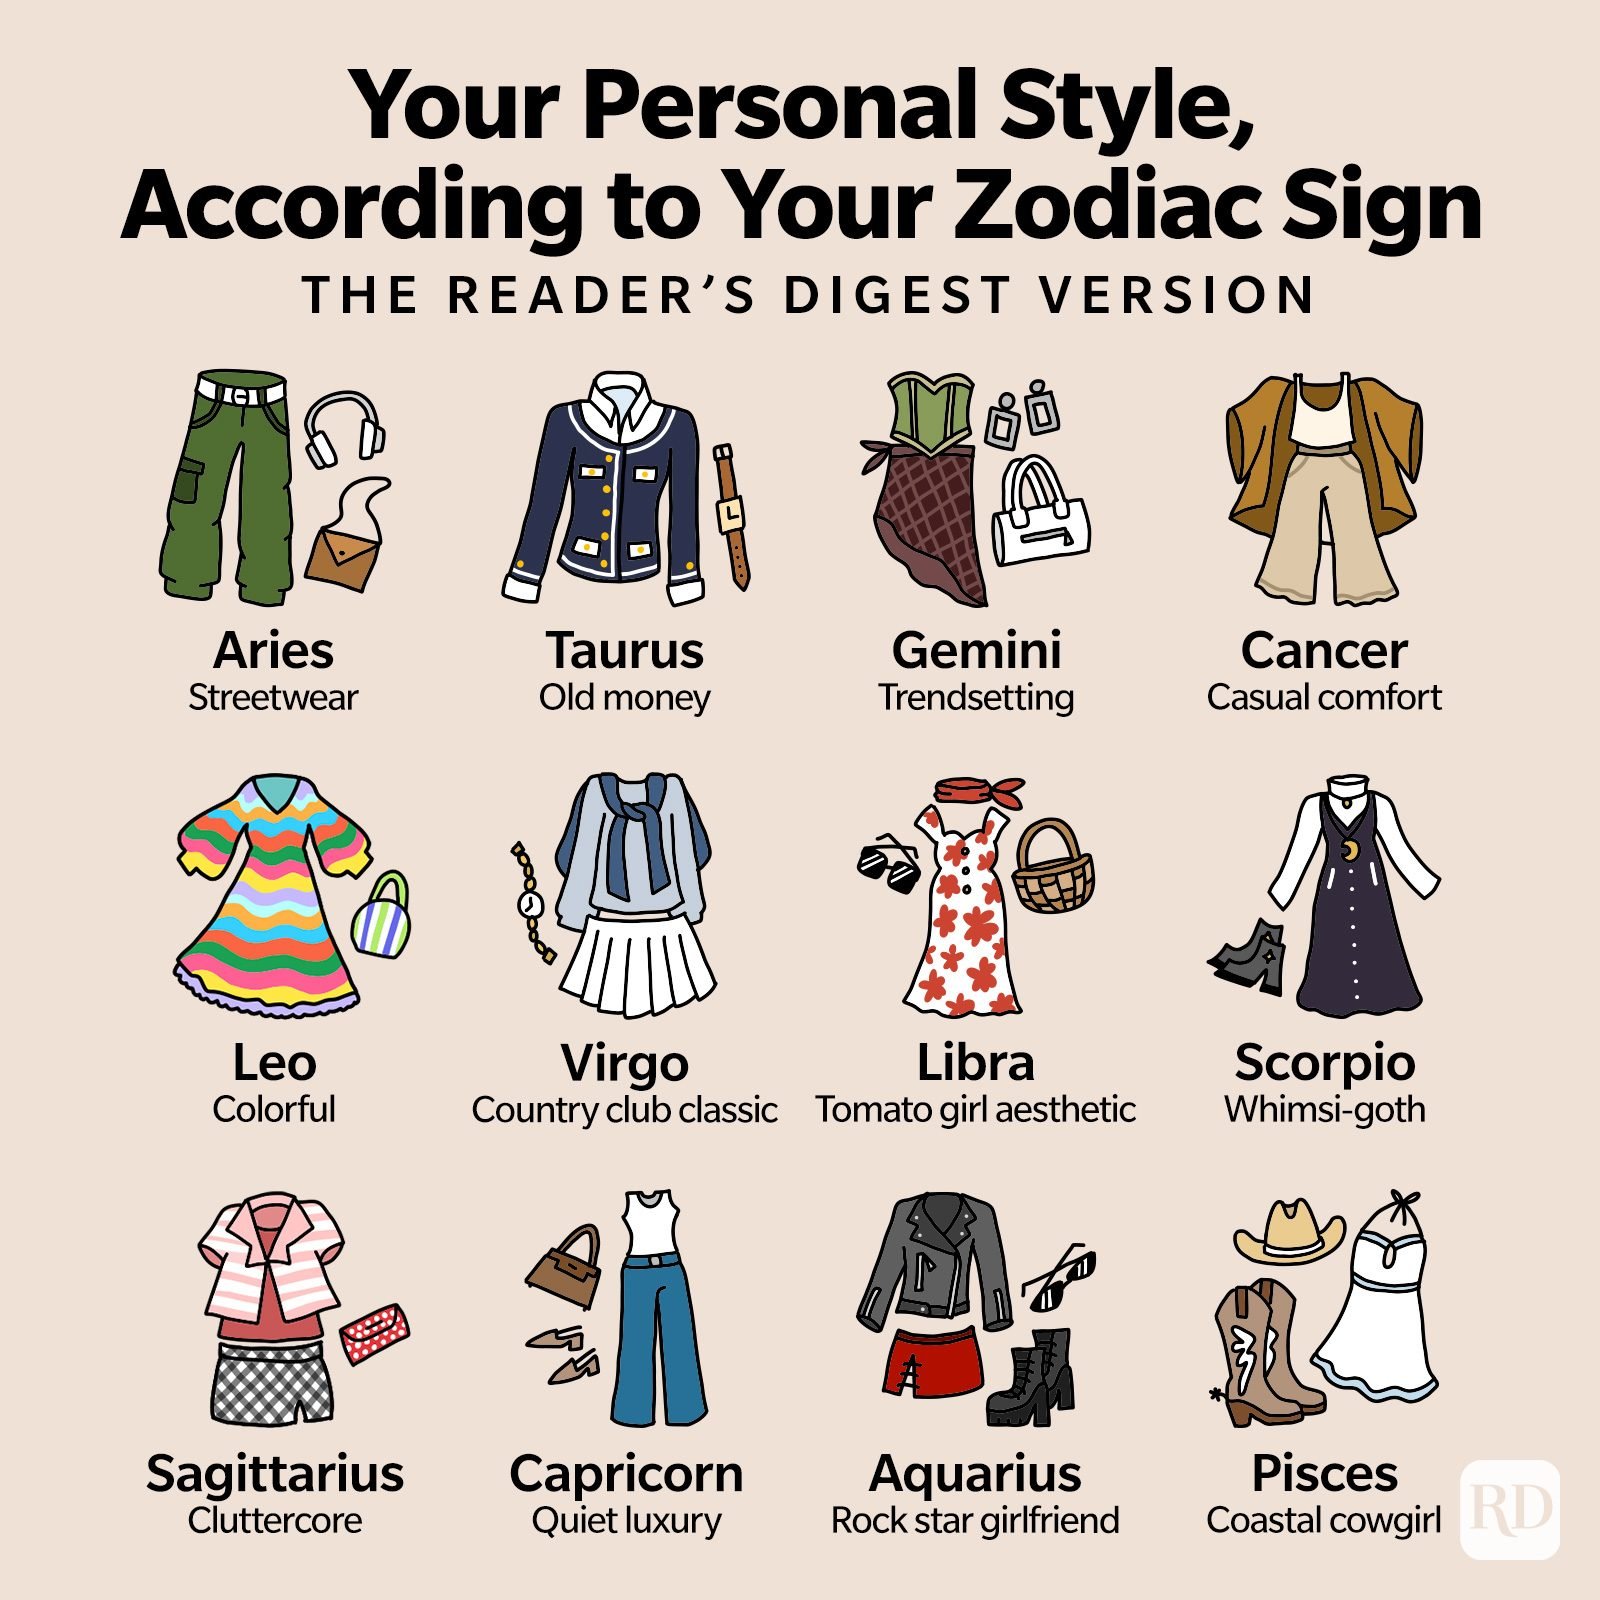 What Is Your Personal Style, According to Your Zodiac Sign?